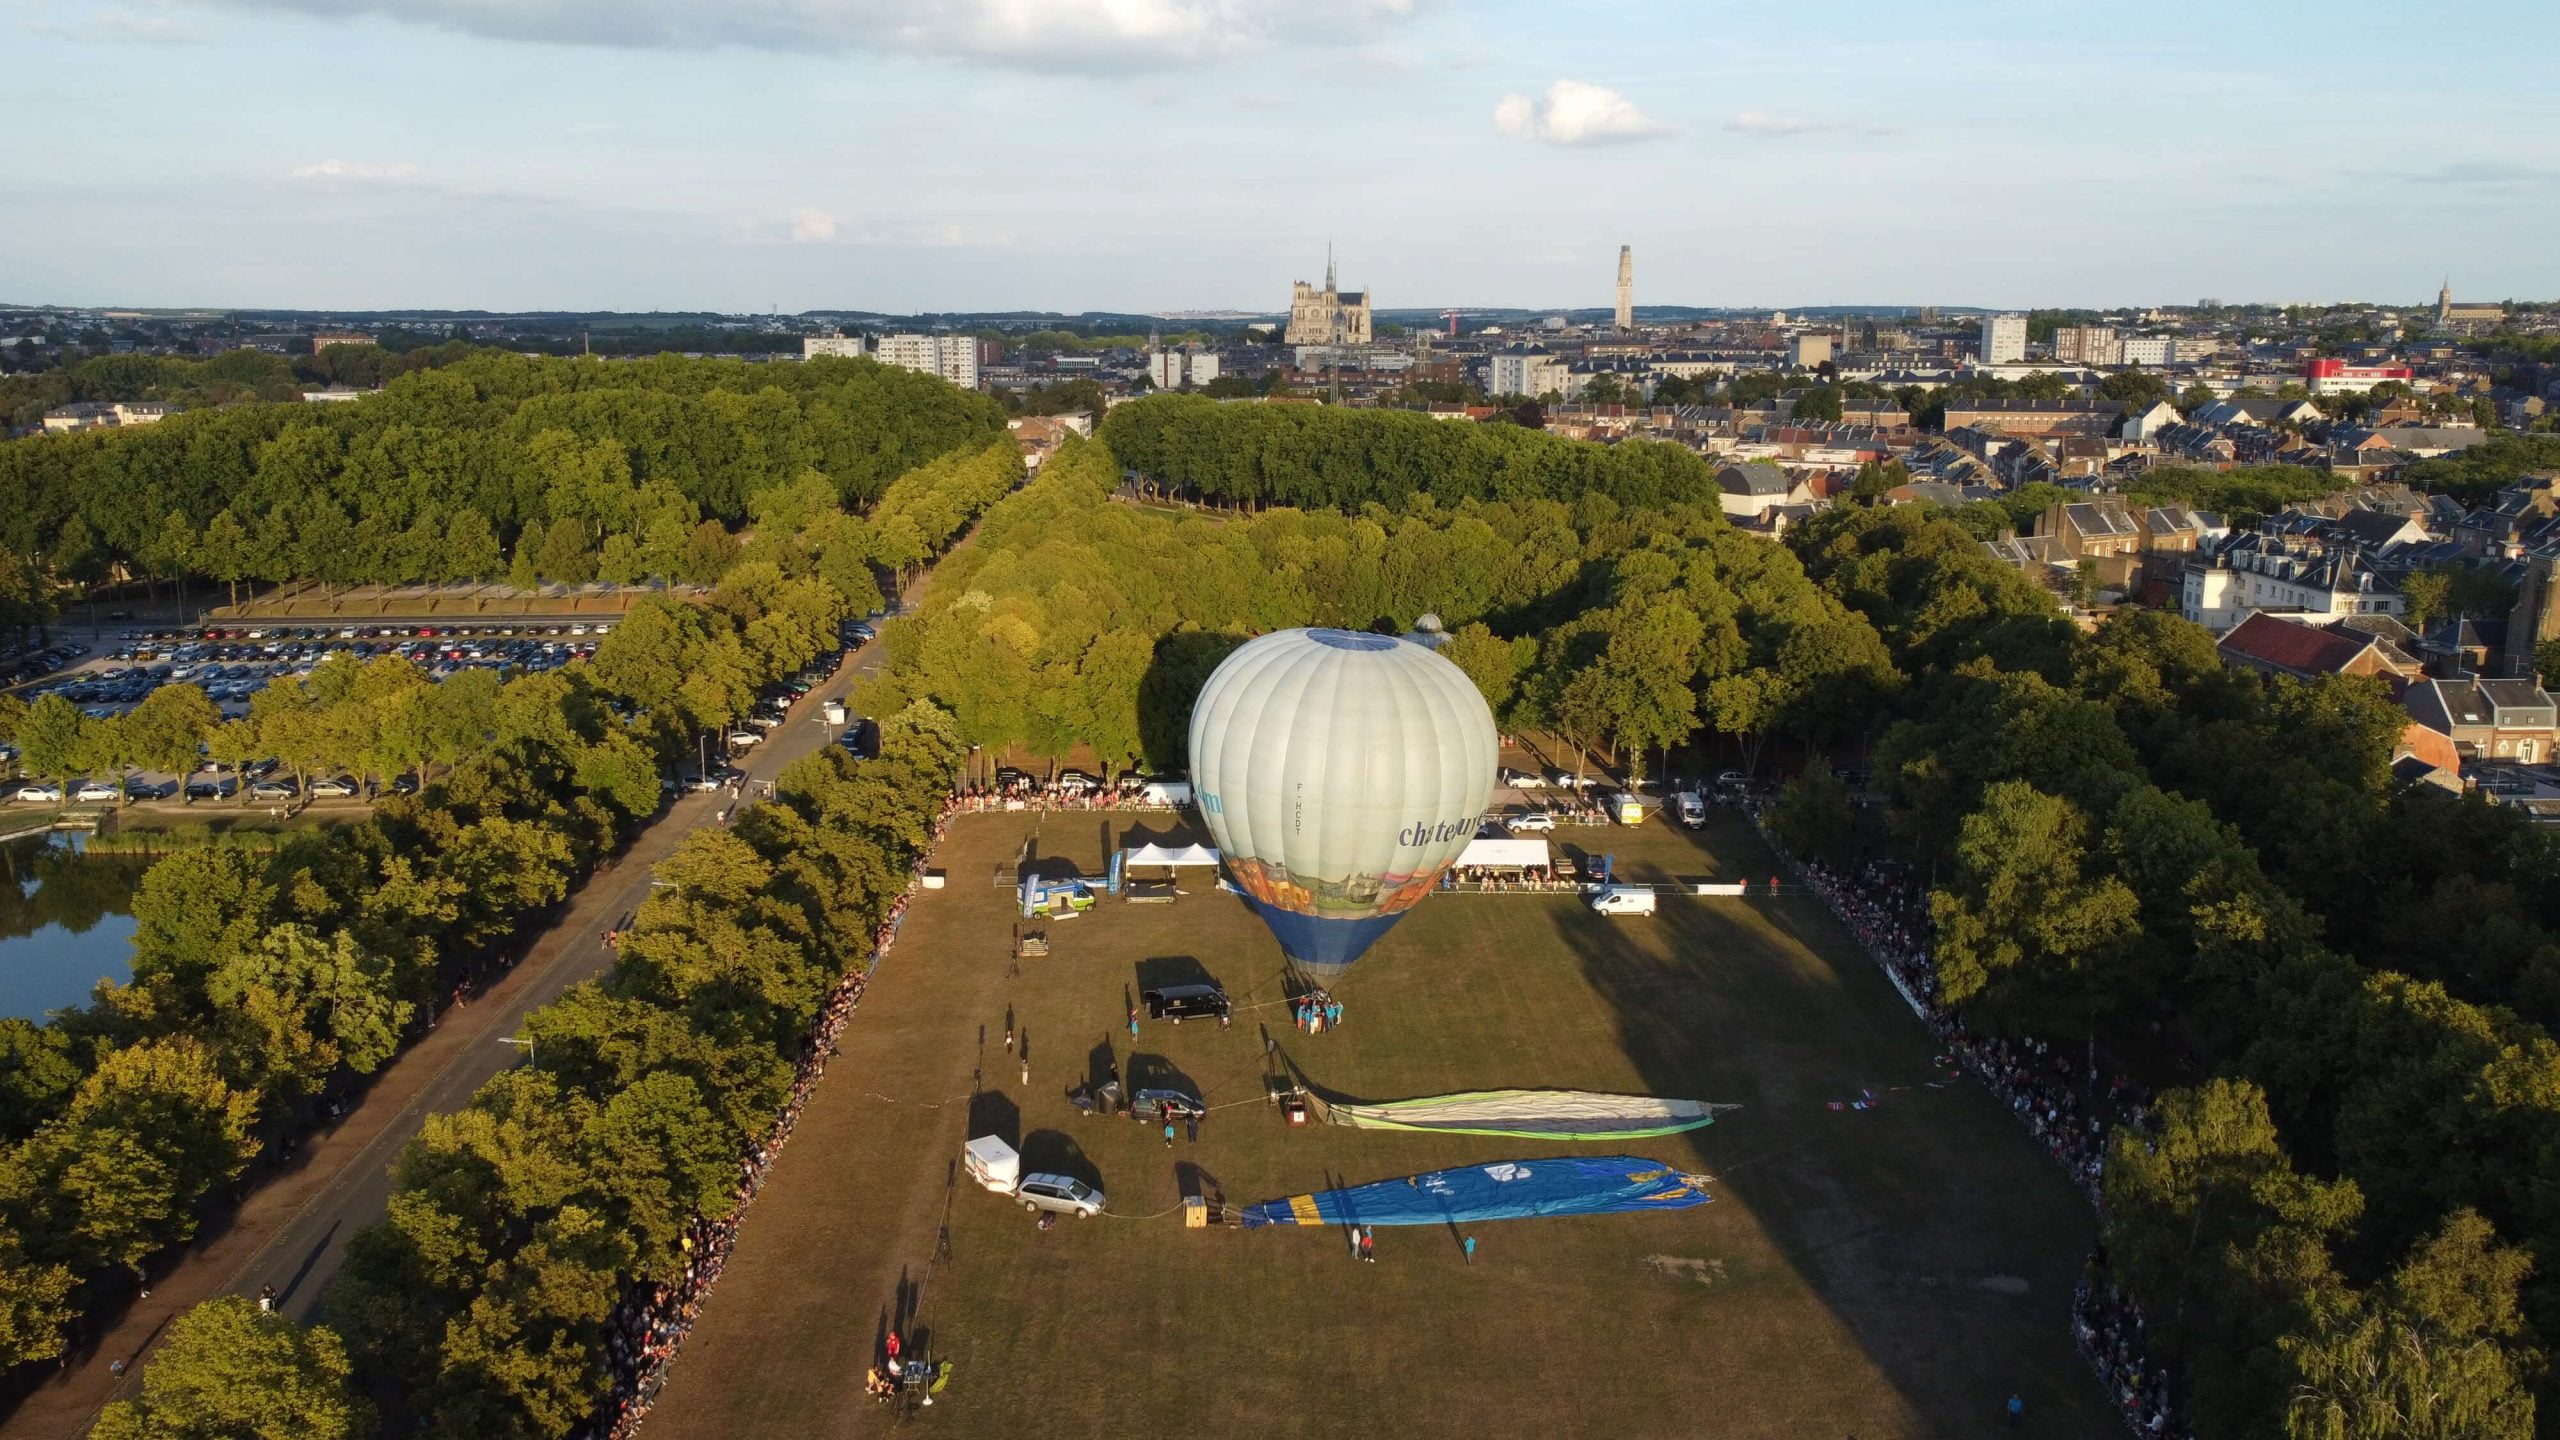 luchtballon, picardie